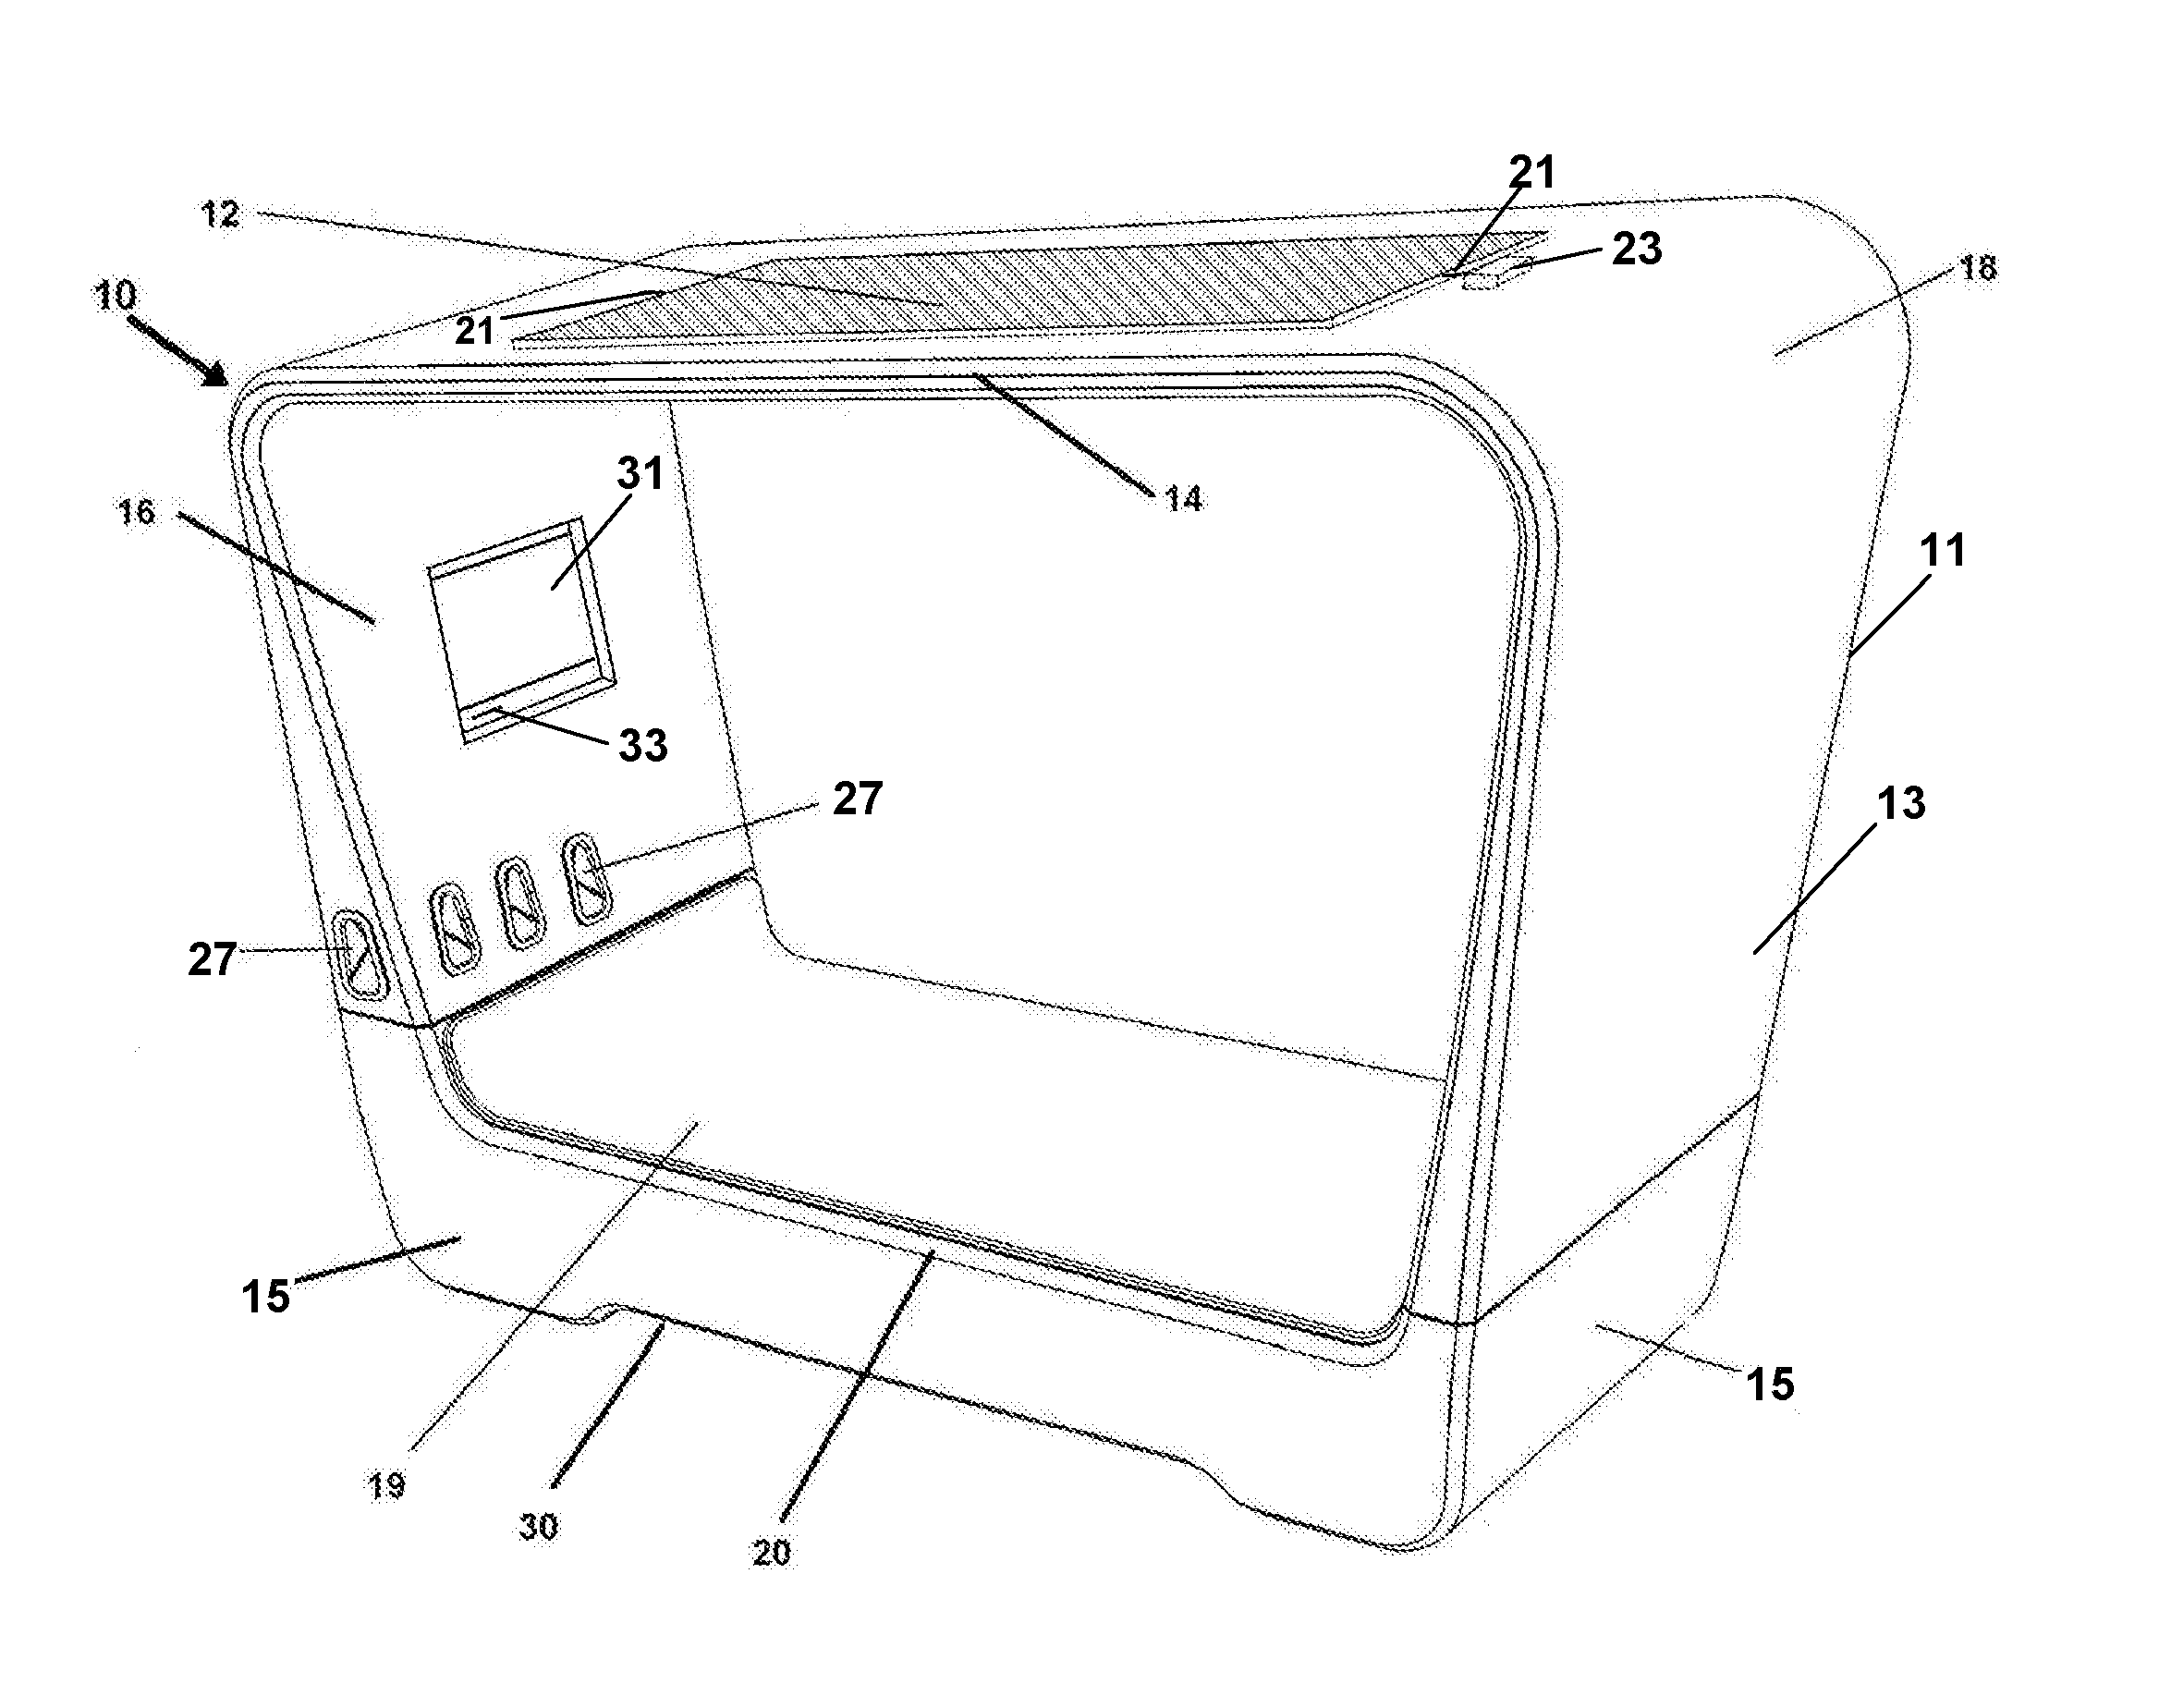 Portable Recharging Station With Shaded Seating and Method